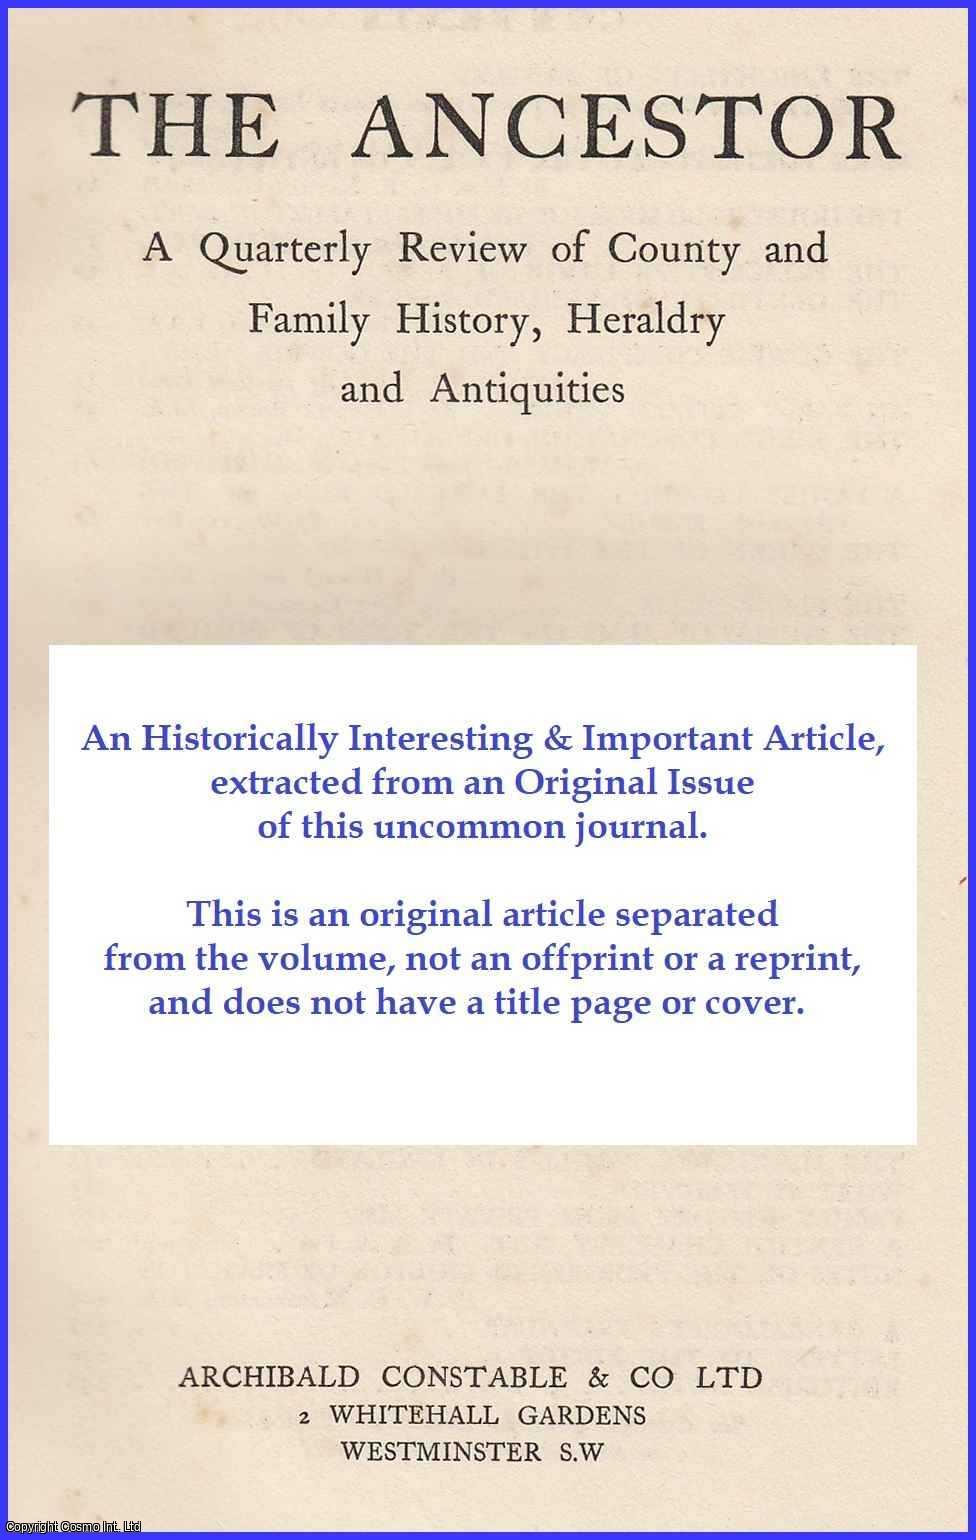 J. Horace Round - Family History From Private Manuscripts of Lord Carlisle. An original article from The Ancestor, a Quarterly Review of County & Family History, Heraldry and Antiquities, 1904.